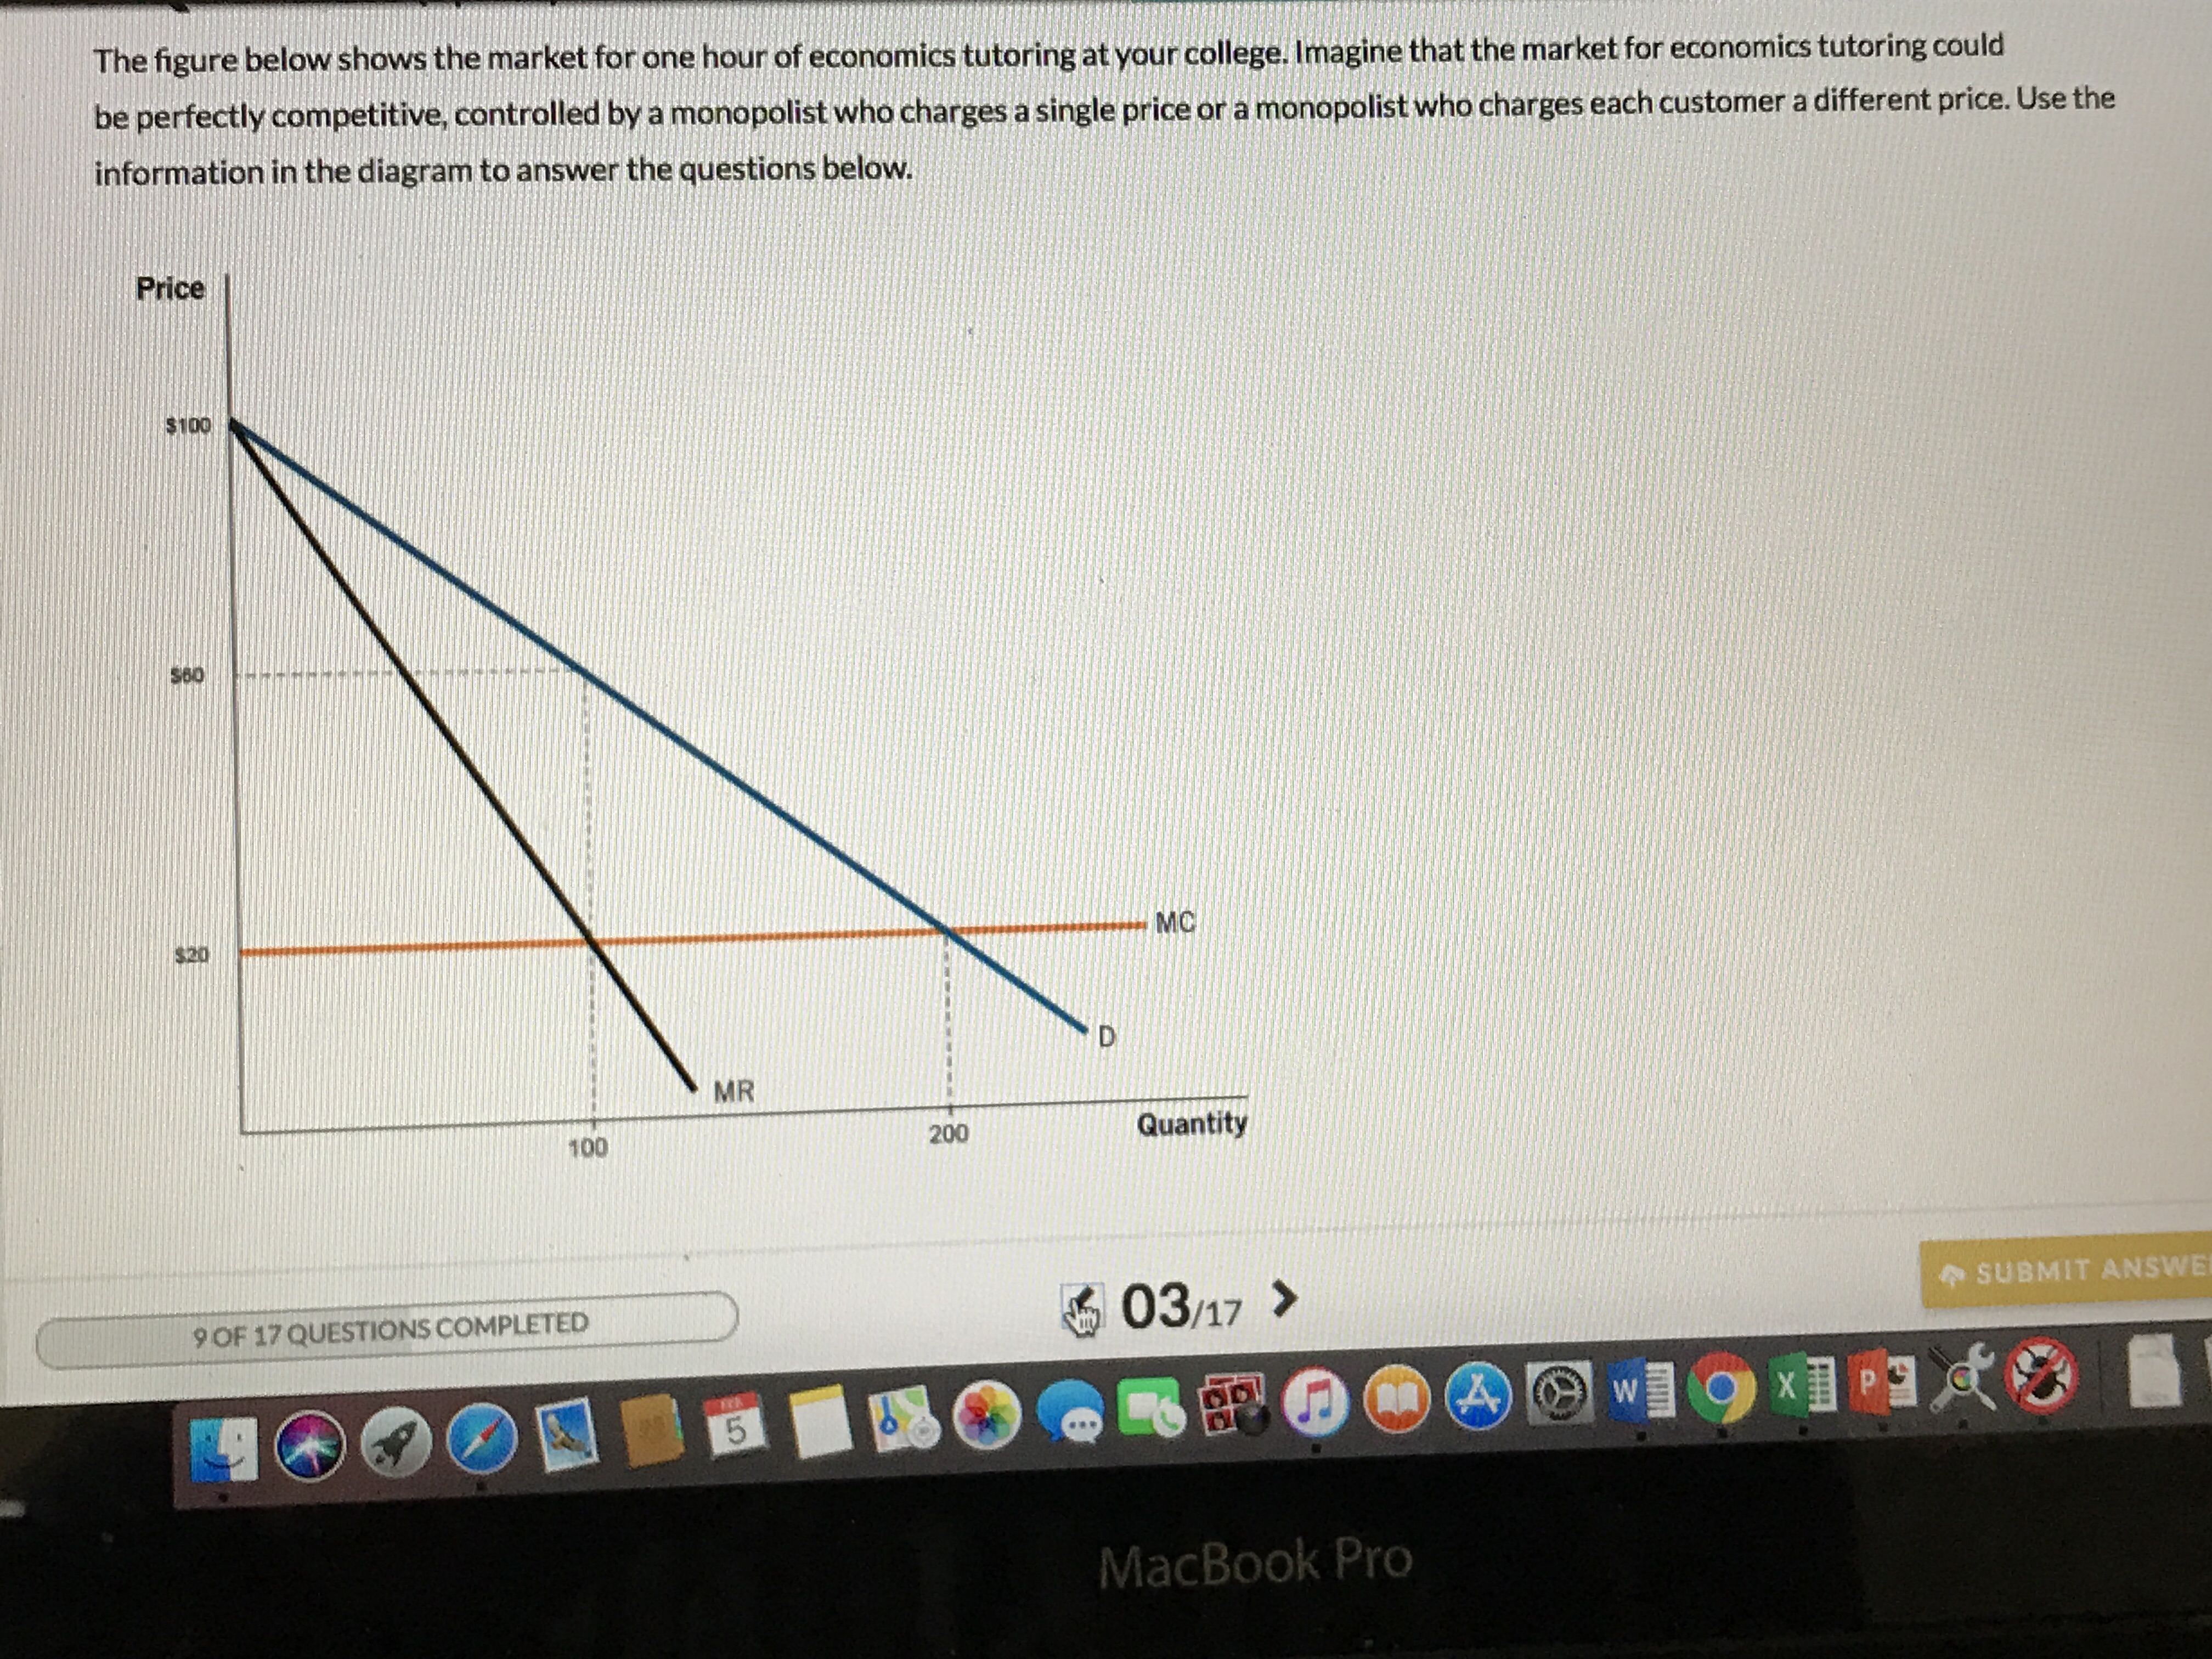 The figure below shows the market for one hour of economics tutoring at your college. Imagine that the market for economics tutoring could
be perfectly competitive, controlled by a monopolist who charges a single price or a monopolist who charges each customer a different price. Use the
information in the diagram to answer the questions below.
Price
$100
$60
MC
$20
MR
Quantity
200
100
SUBMIT ANSWE
03.17 >
9 OF 17 QUESTIONS COMPLETED
MacBook Pro
